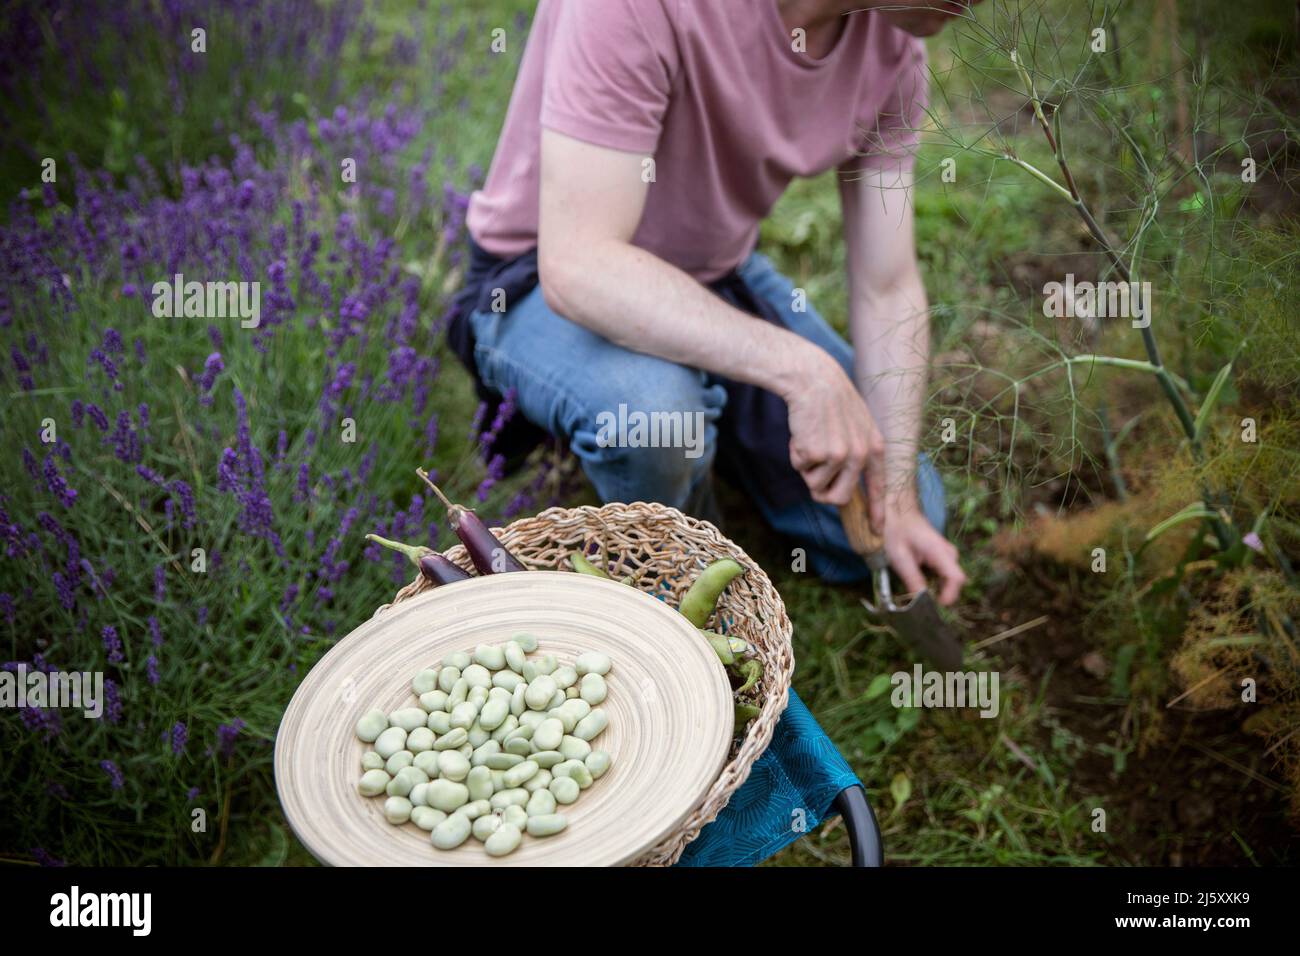 Man digging in garden dirt behind harvested butter beans Stock Photo